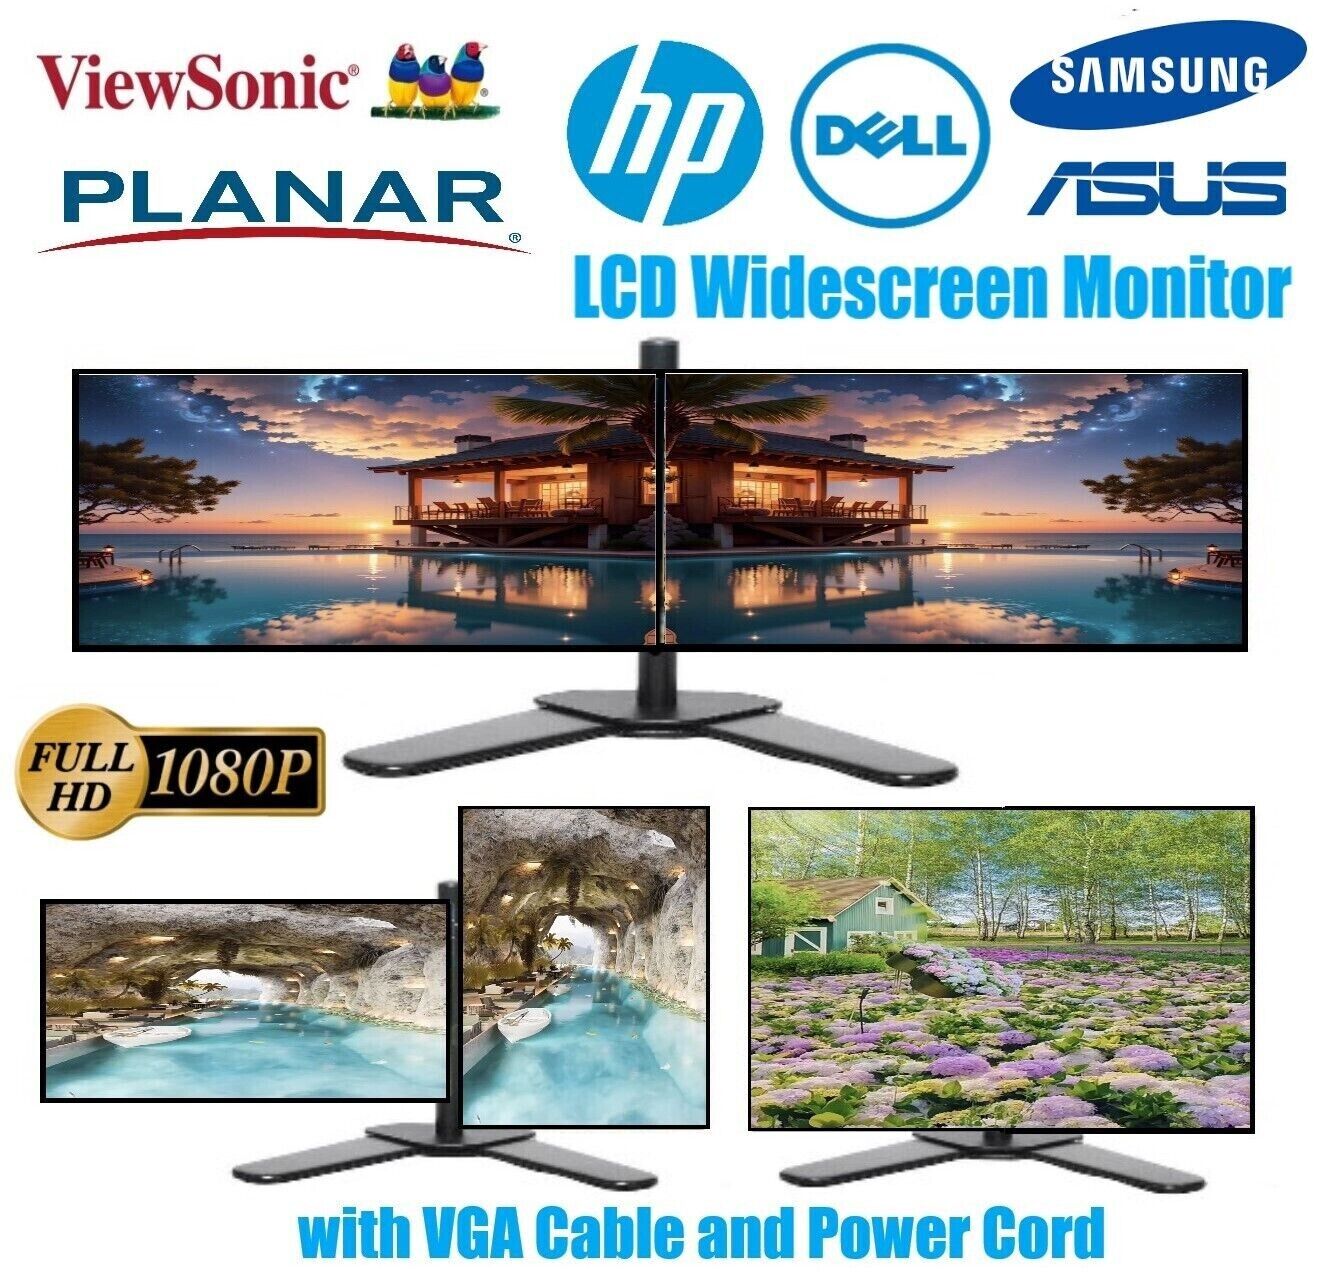 2 X HP Dell Major Brands 22 inch 2-in-1 Stand FHD 1080p LCD Monitor VGA Cable